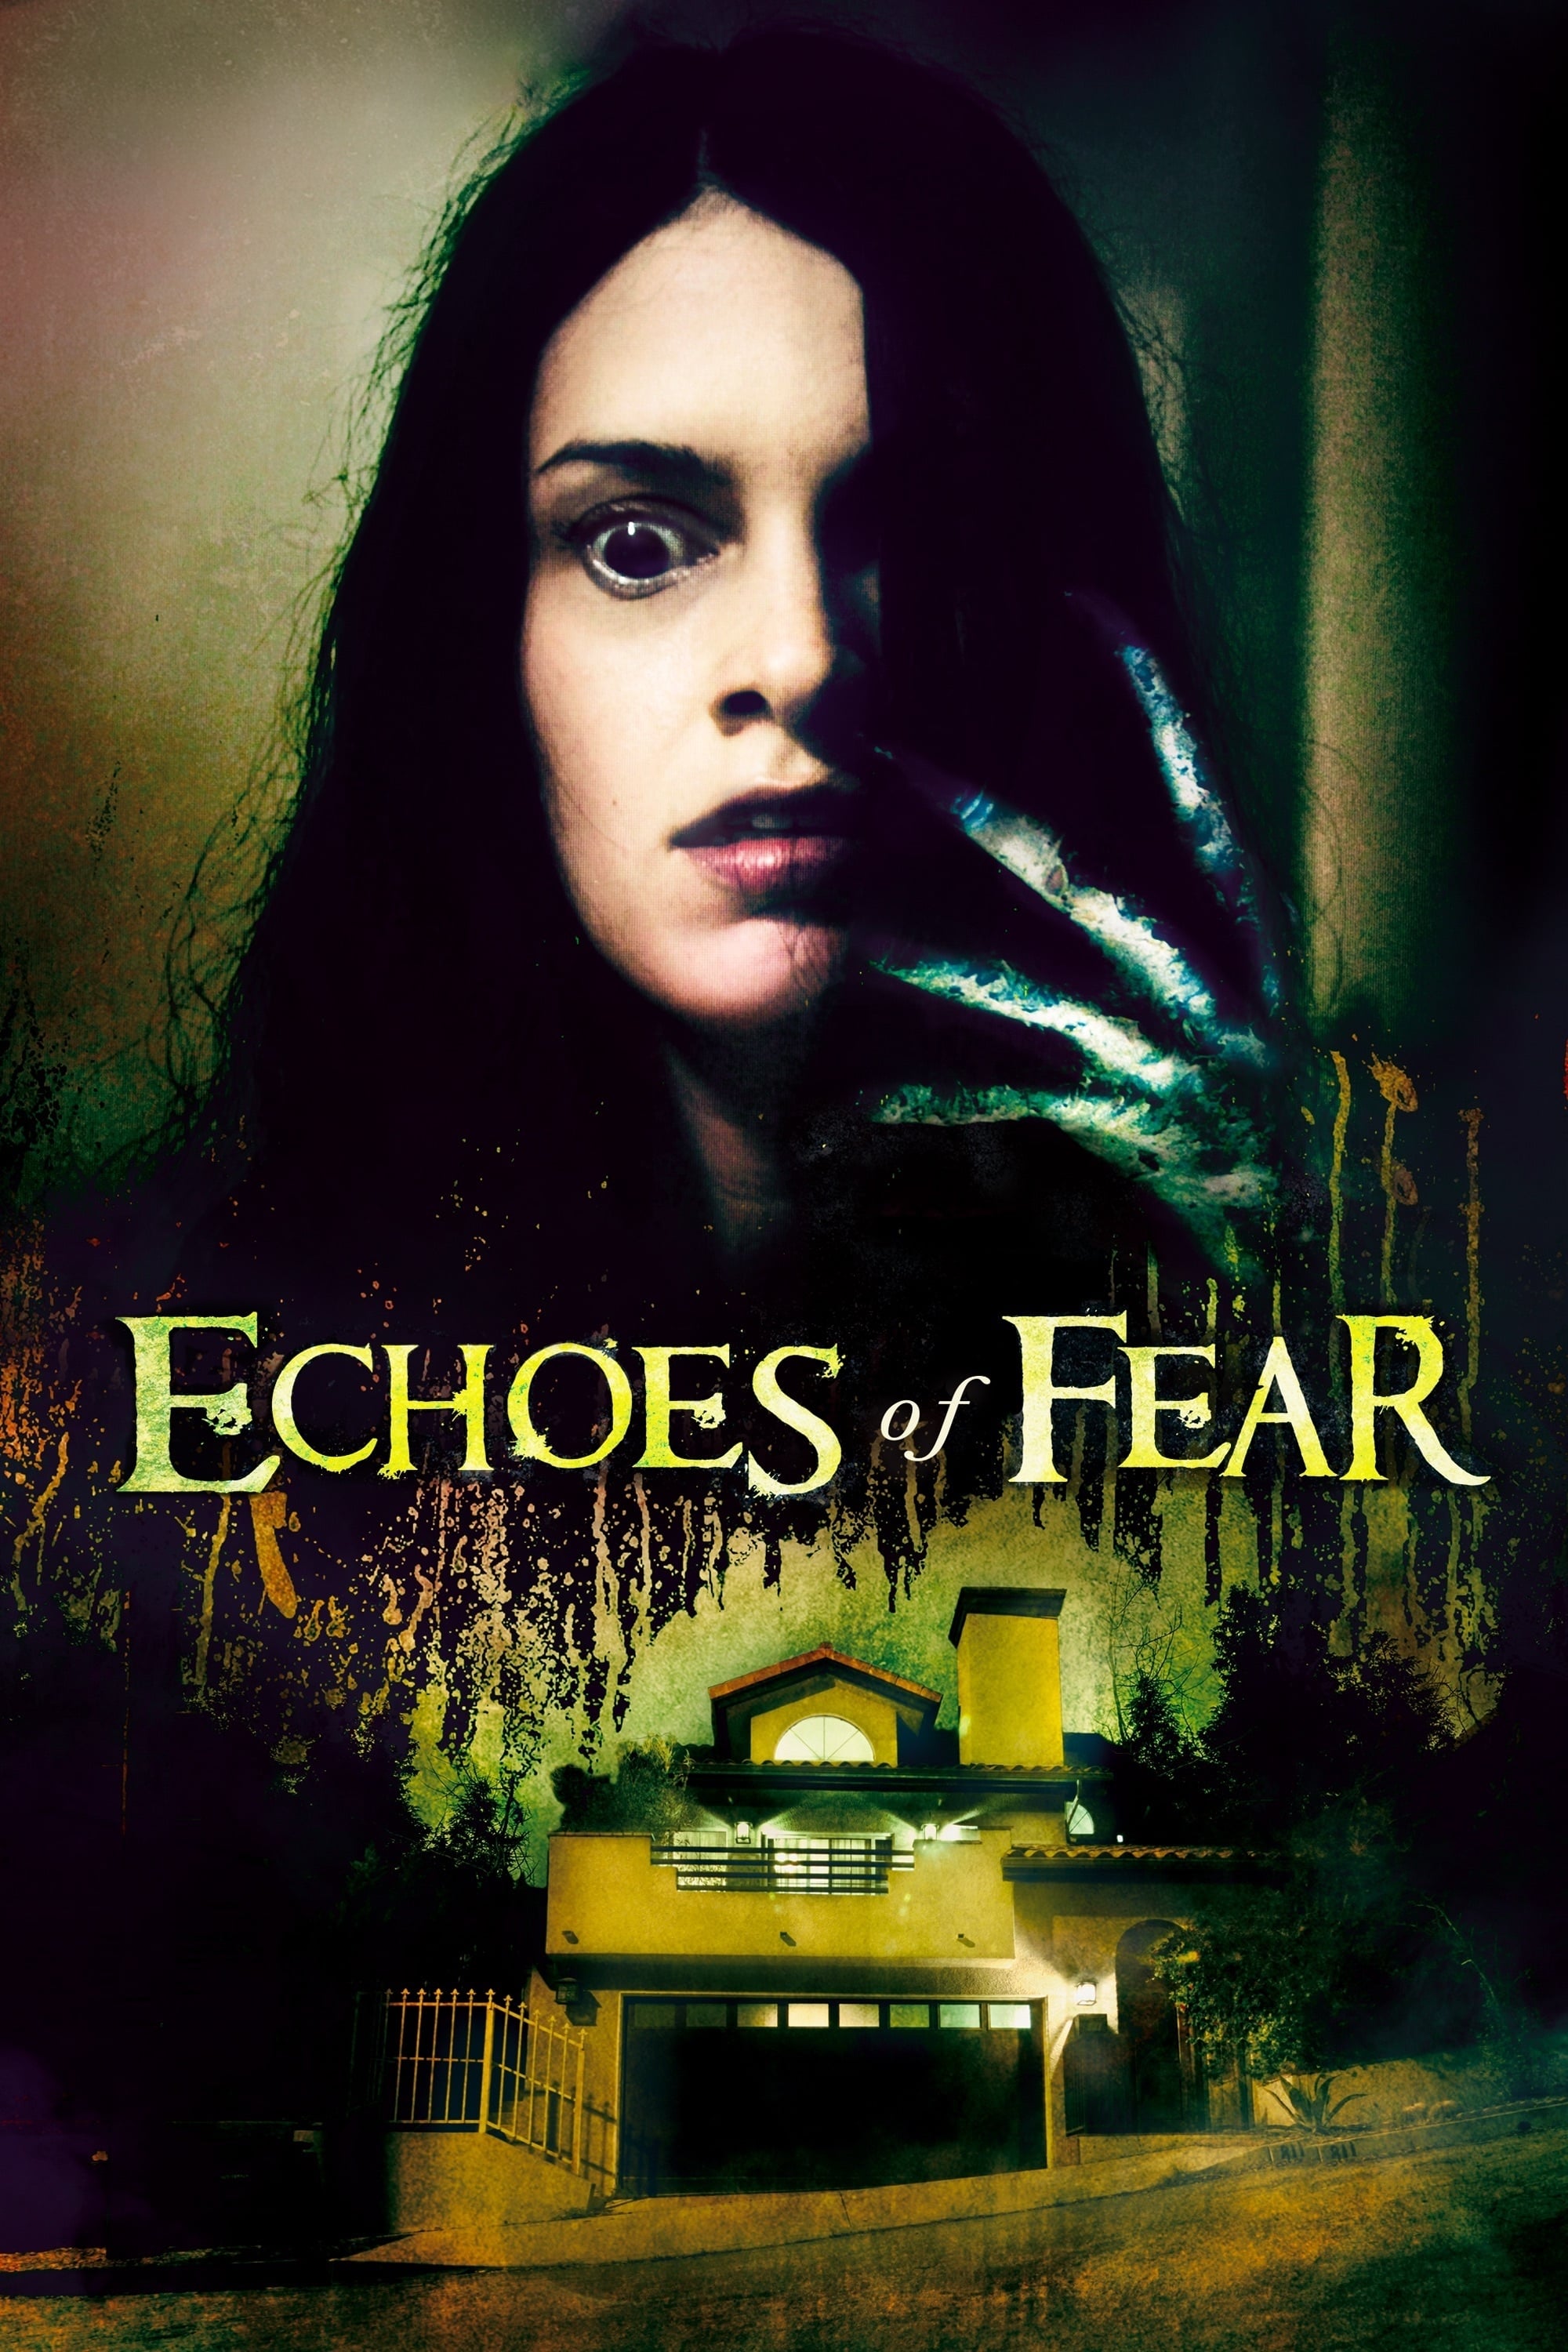 Echoes of Fear film